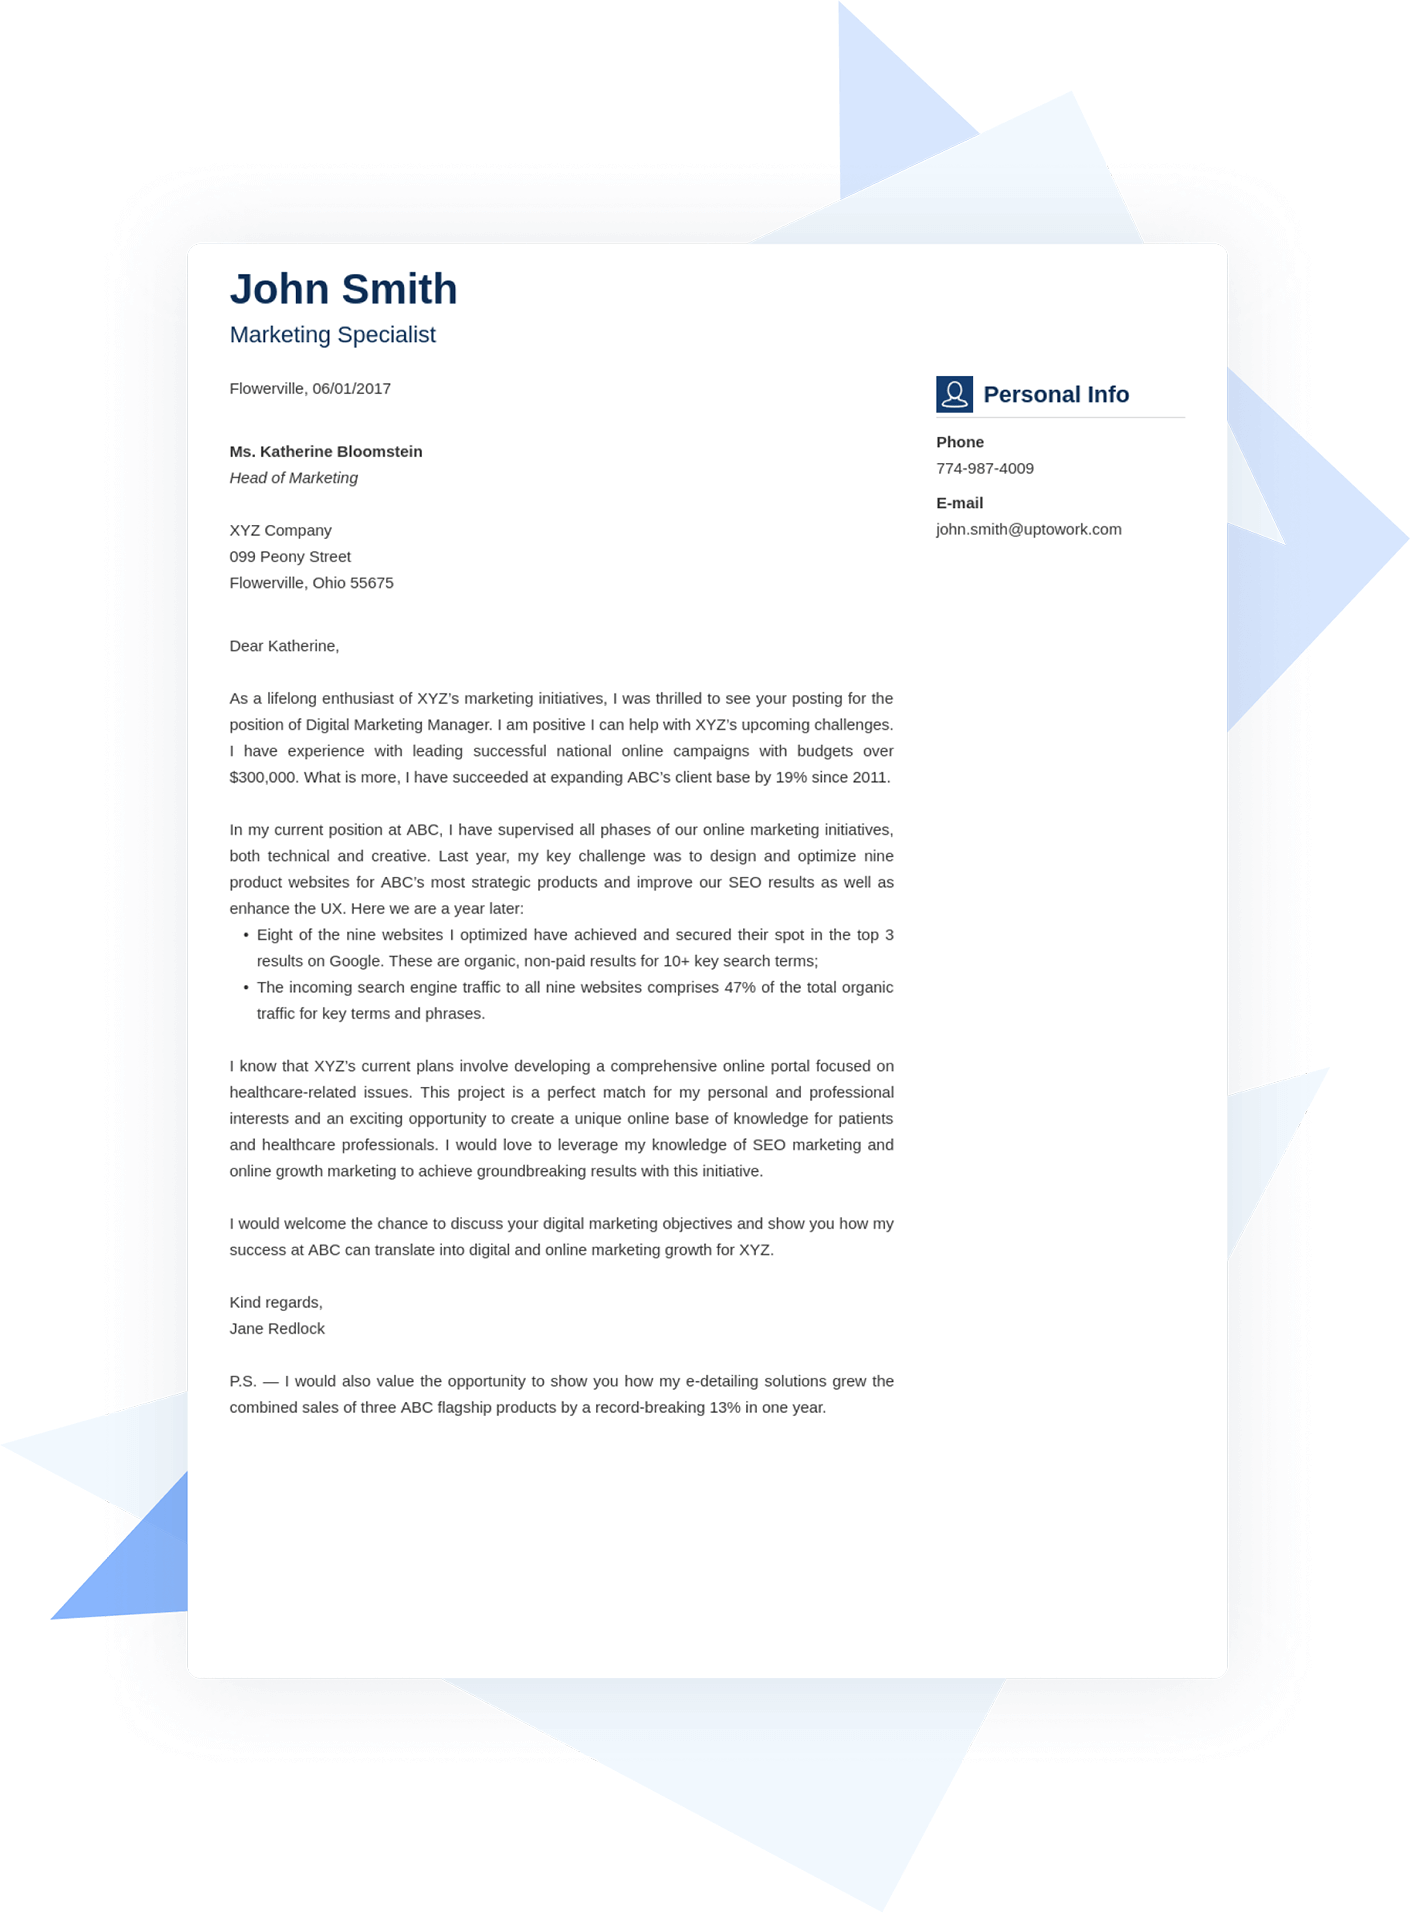 Online Application Cover Letter from cdn-images.zety.com